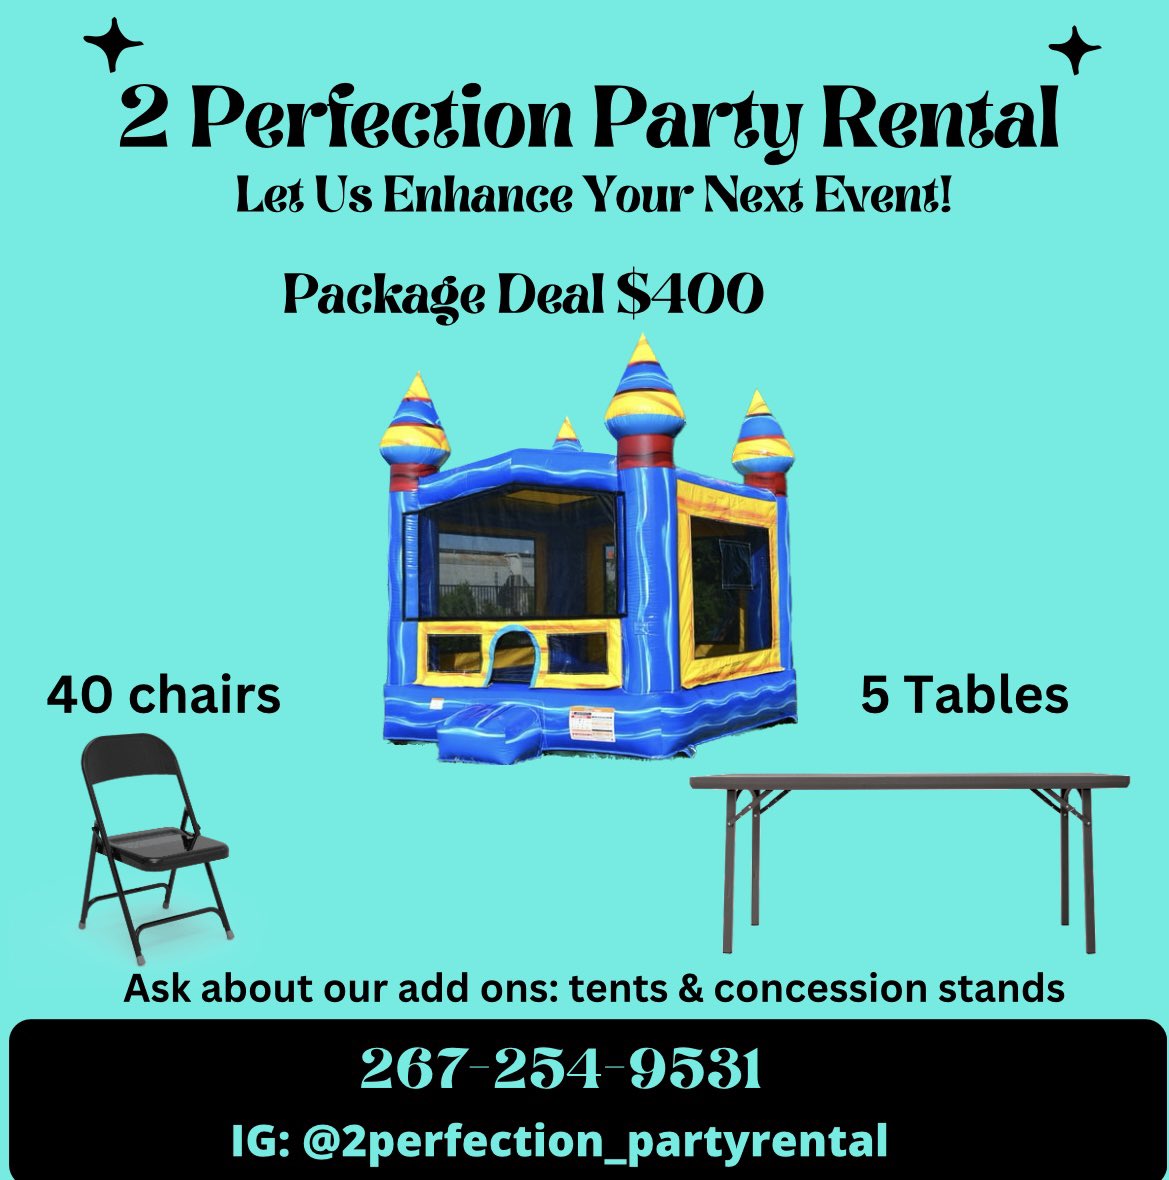 Rent our moon bounce, tables and chairs for your next event  #partyrental #tables #chairs #tablesandchairs #cottoncandy #popcorn #moonbounce #entertainment #events  #birthdayparty #cookout #familyreunion #bookwithme #philly #nj #de